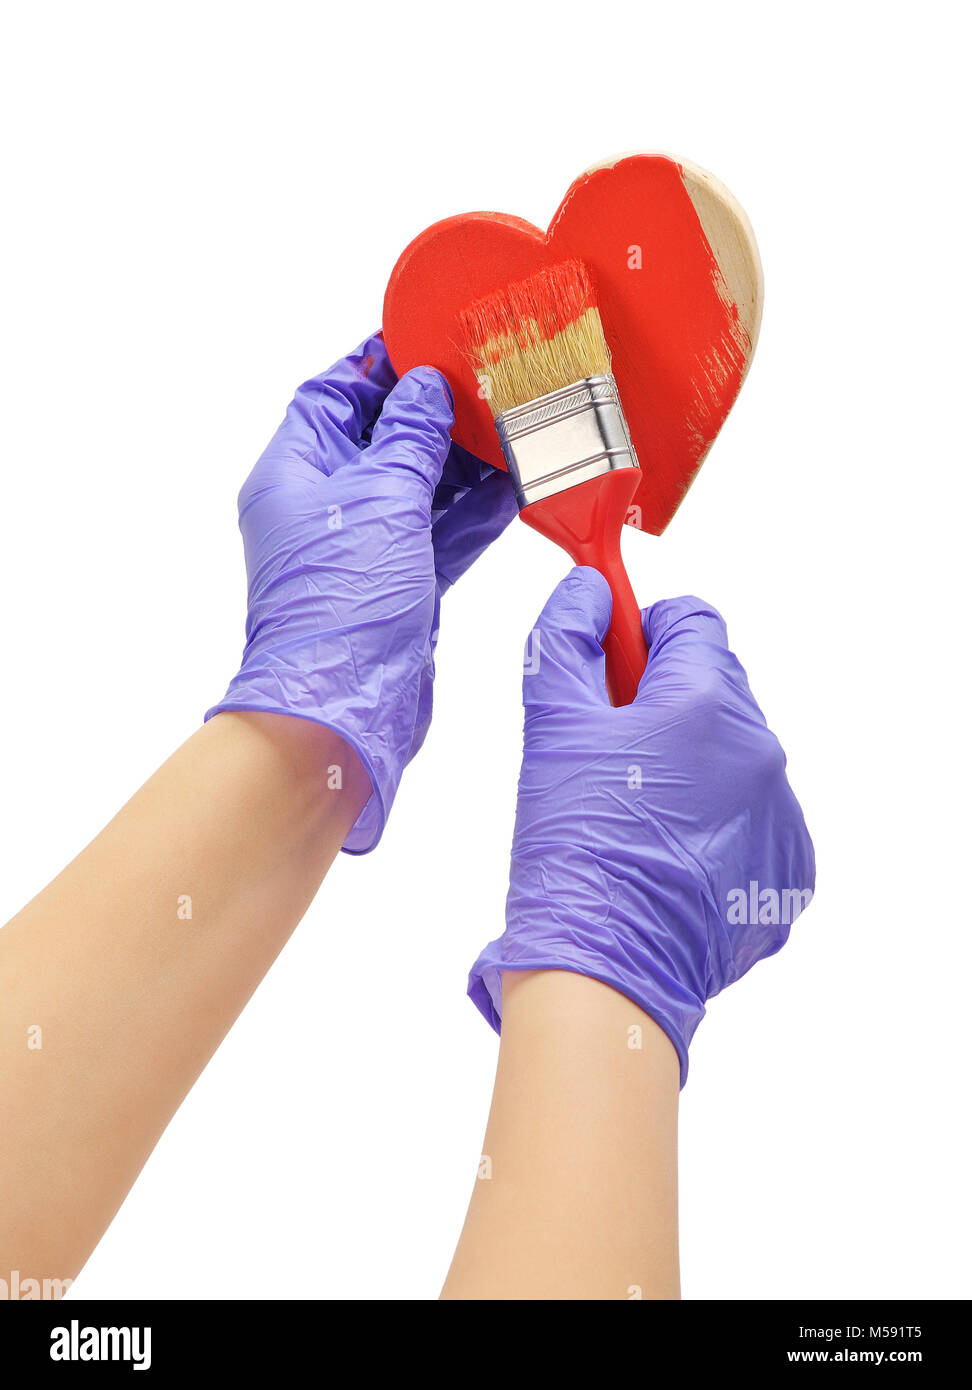 hand paints the heart with a brush hand paint in red wooden heart hand in blue glove holds a red brush Stock Photo